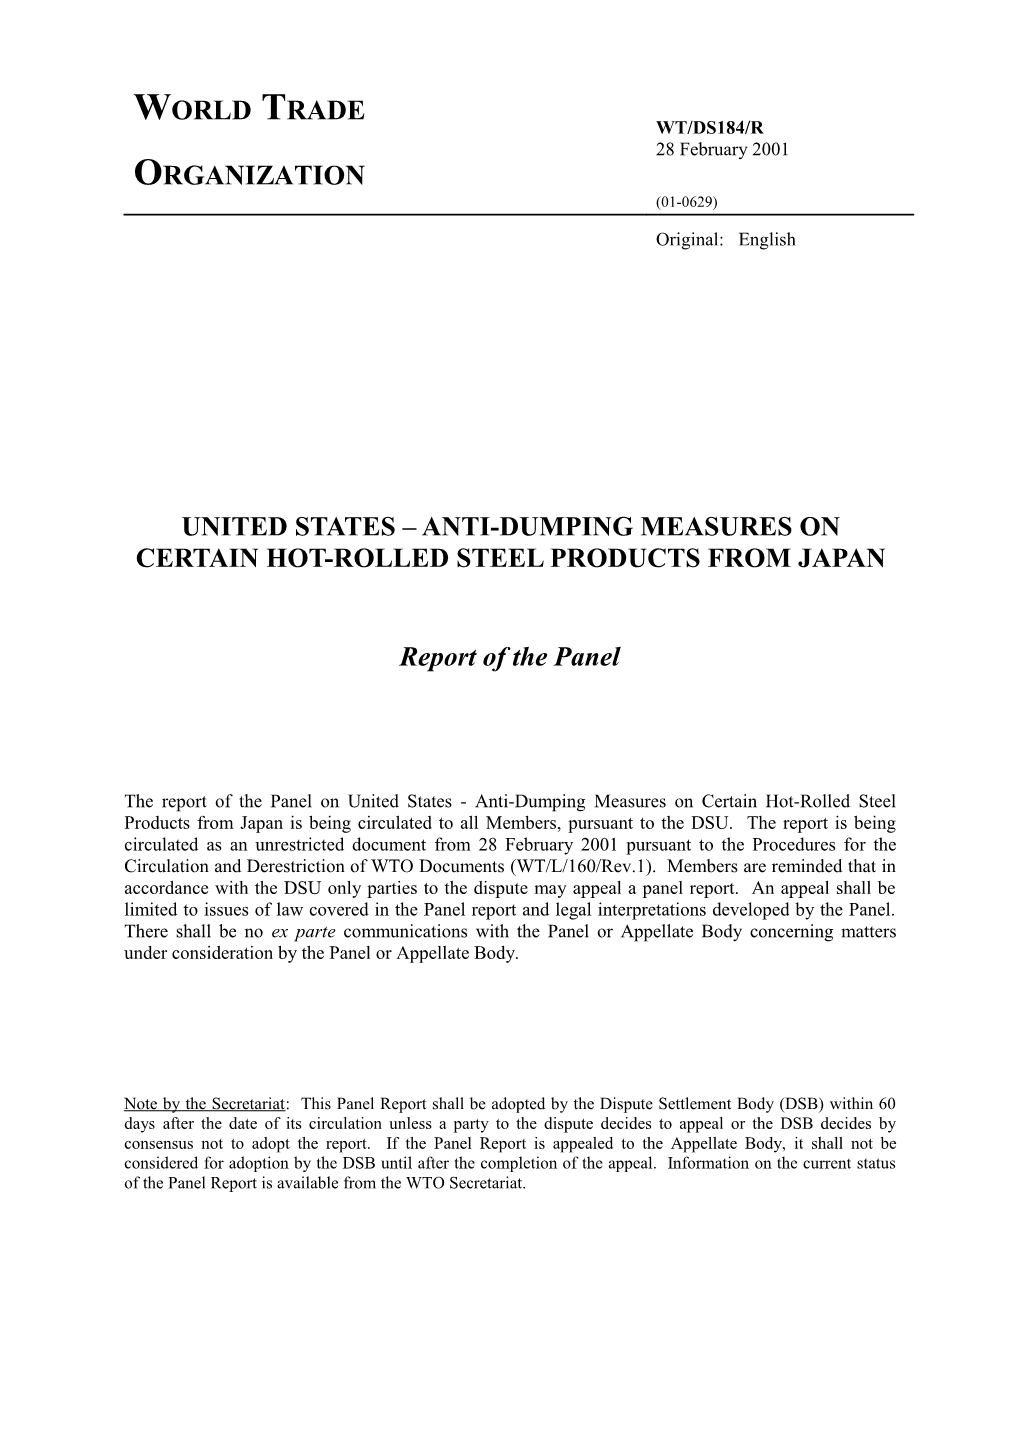 United States Anti-Dumping Measures on Certain Hot-Rolled Steel Products from Japan